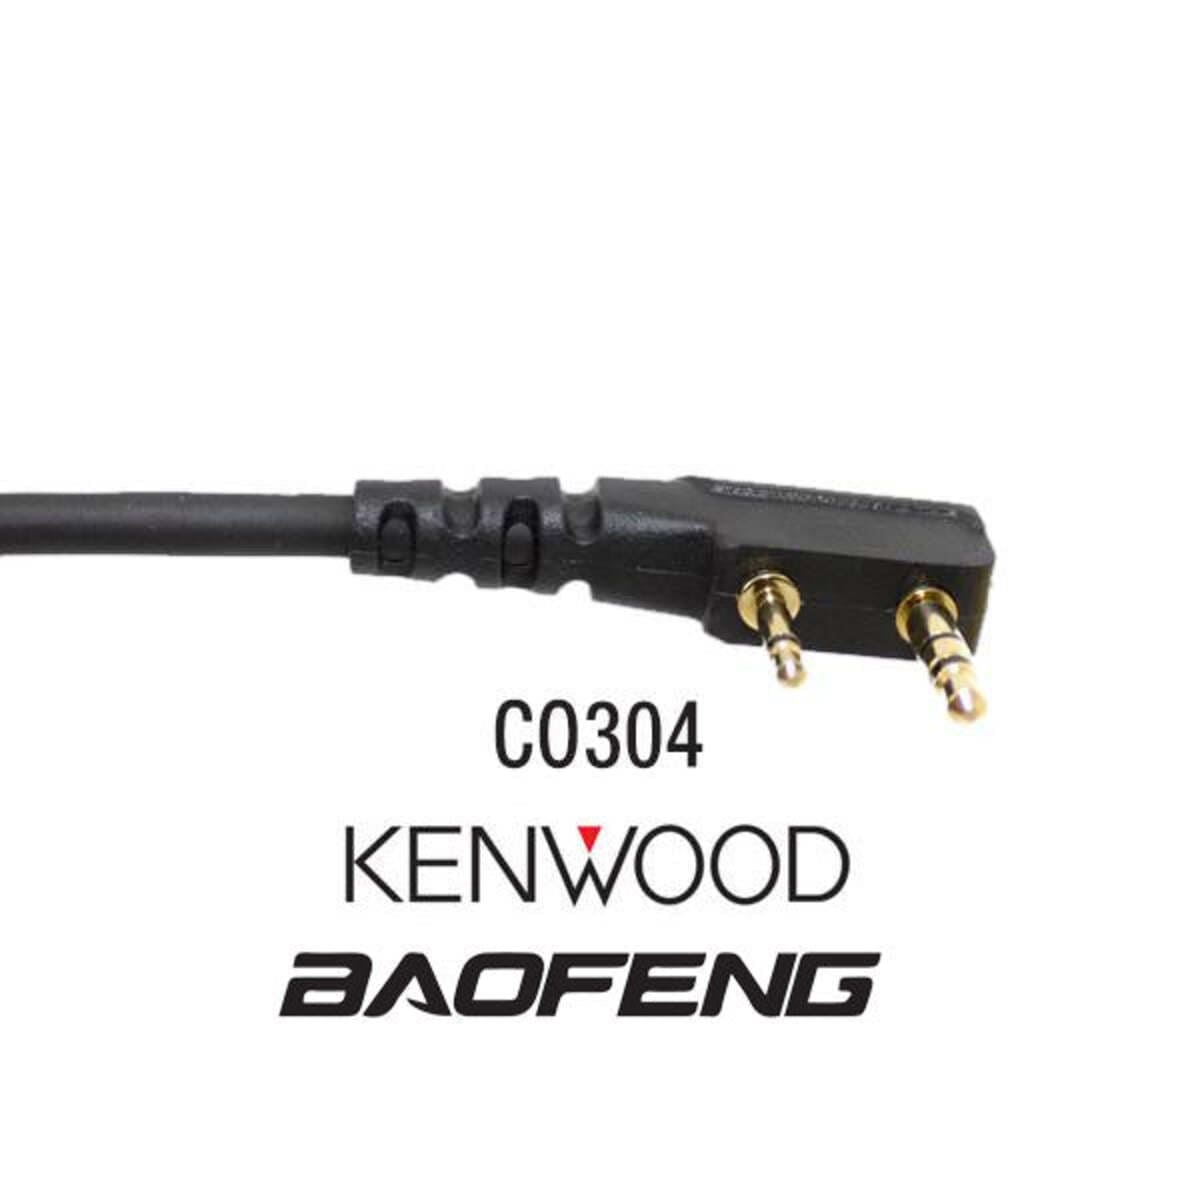 PCI Race Radios Coil Cord Headset Adapter